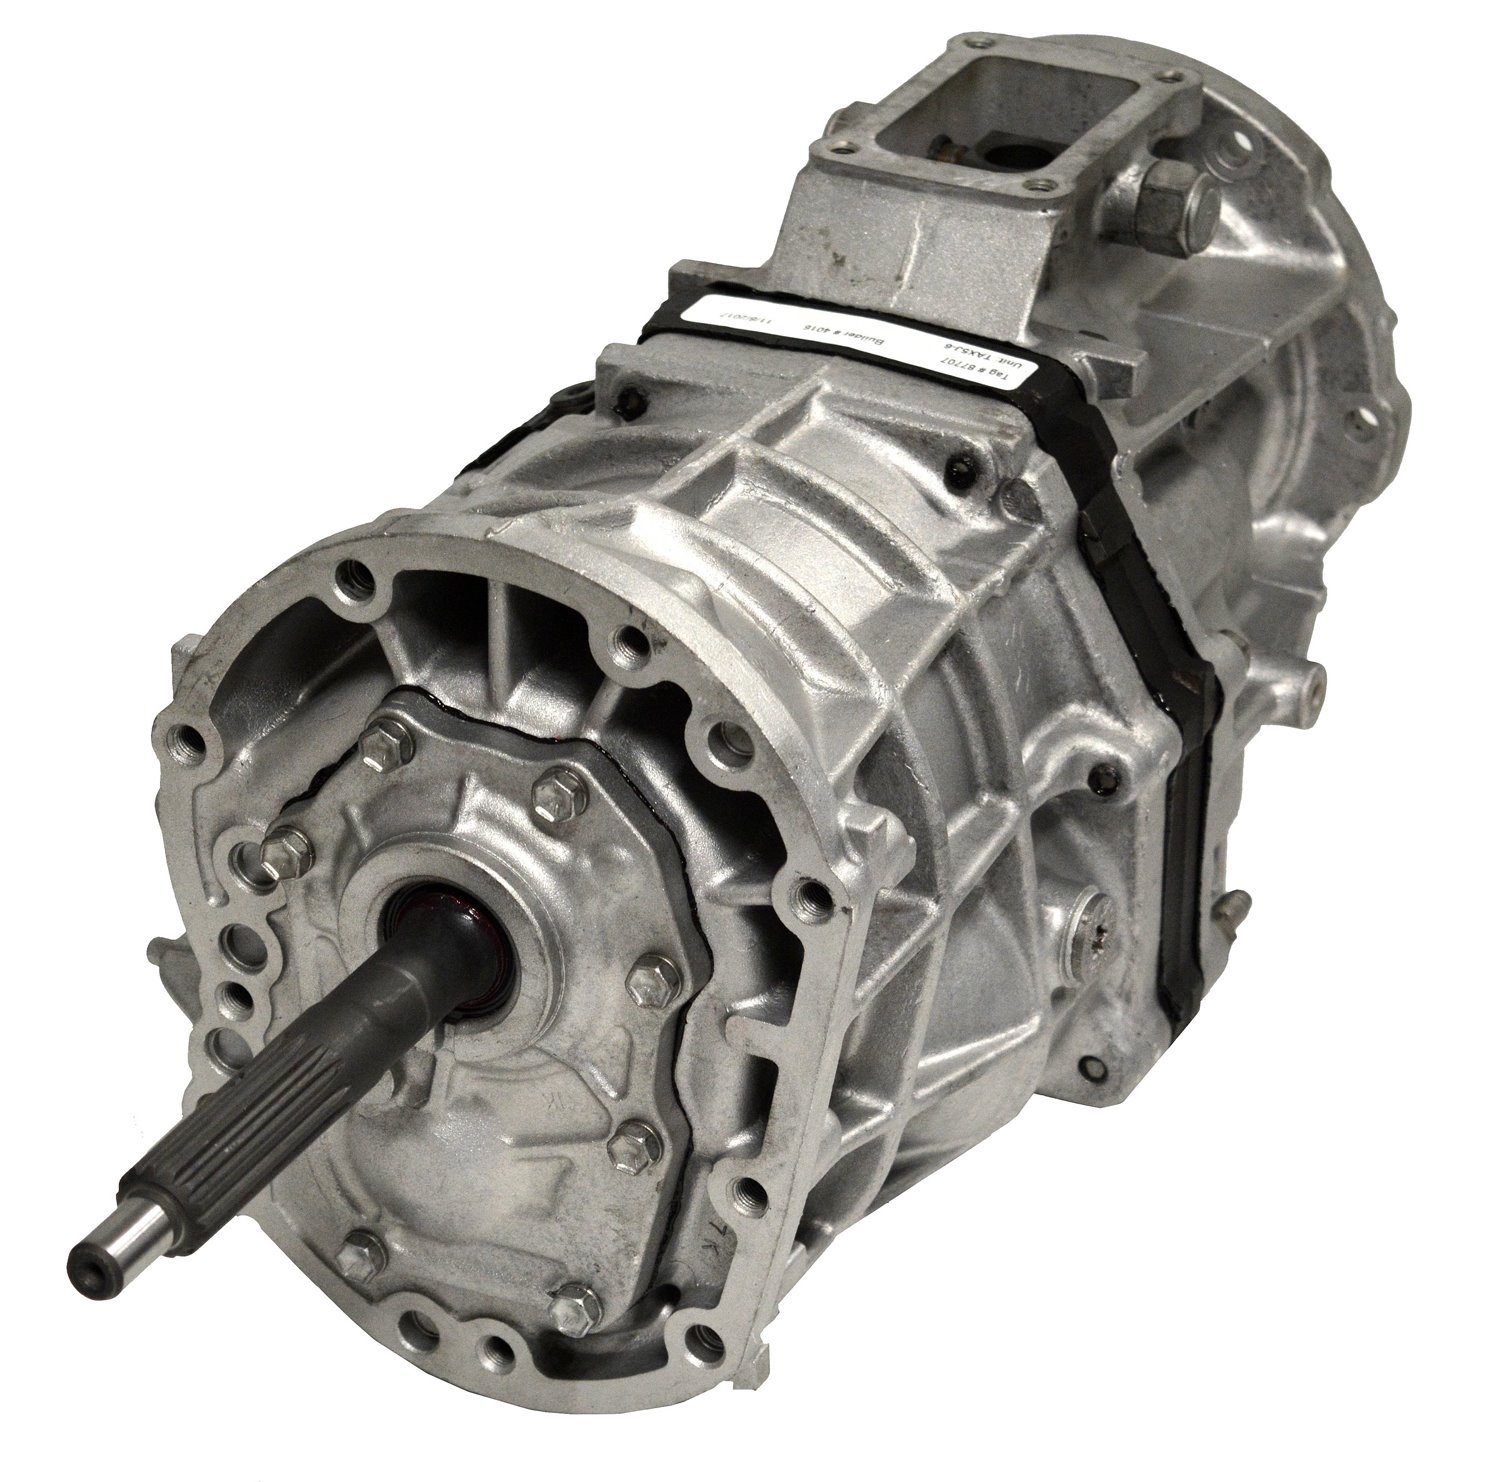 Remanufactured AX5 Manual Transmission for Jeep 87-93 Cherokee, 5 Speed